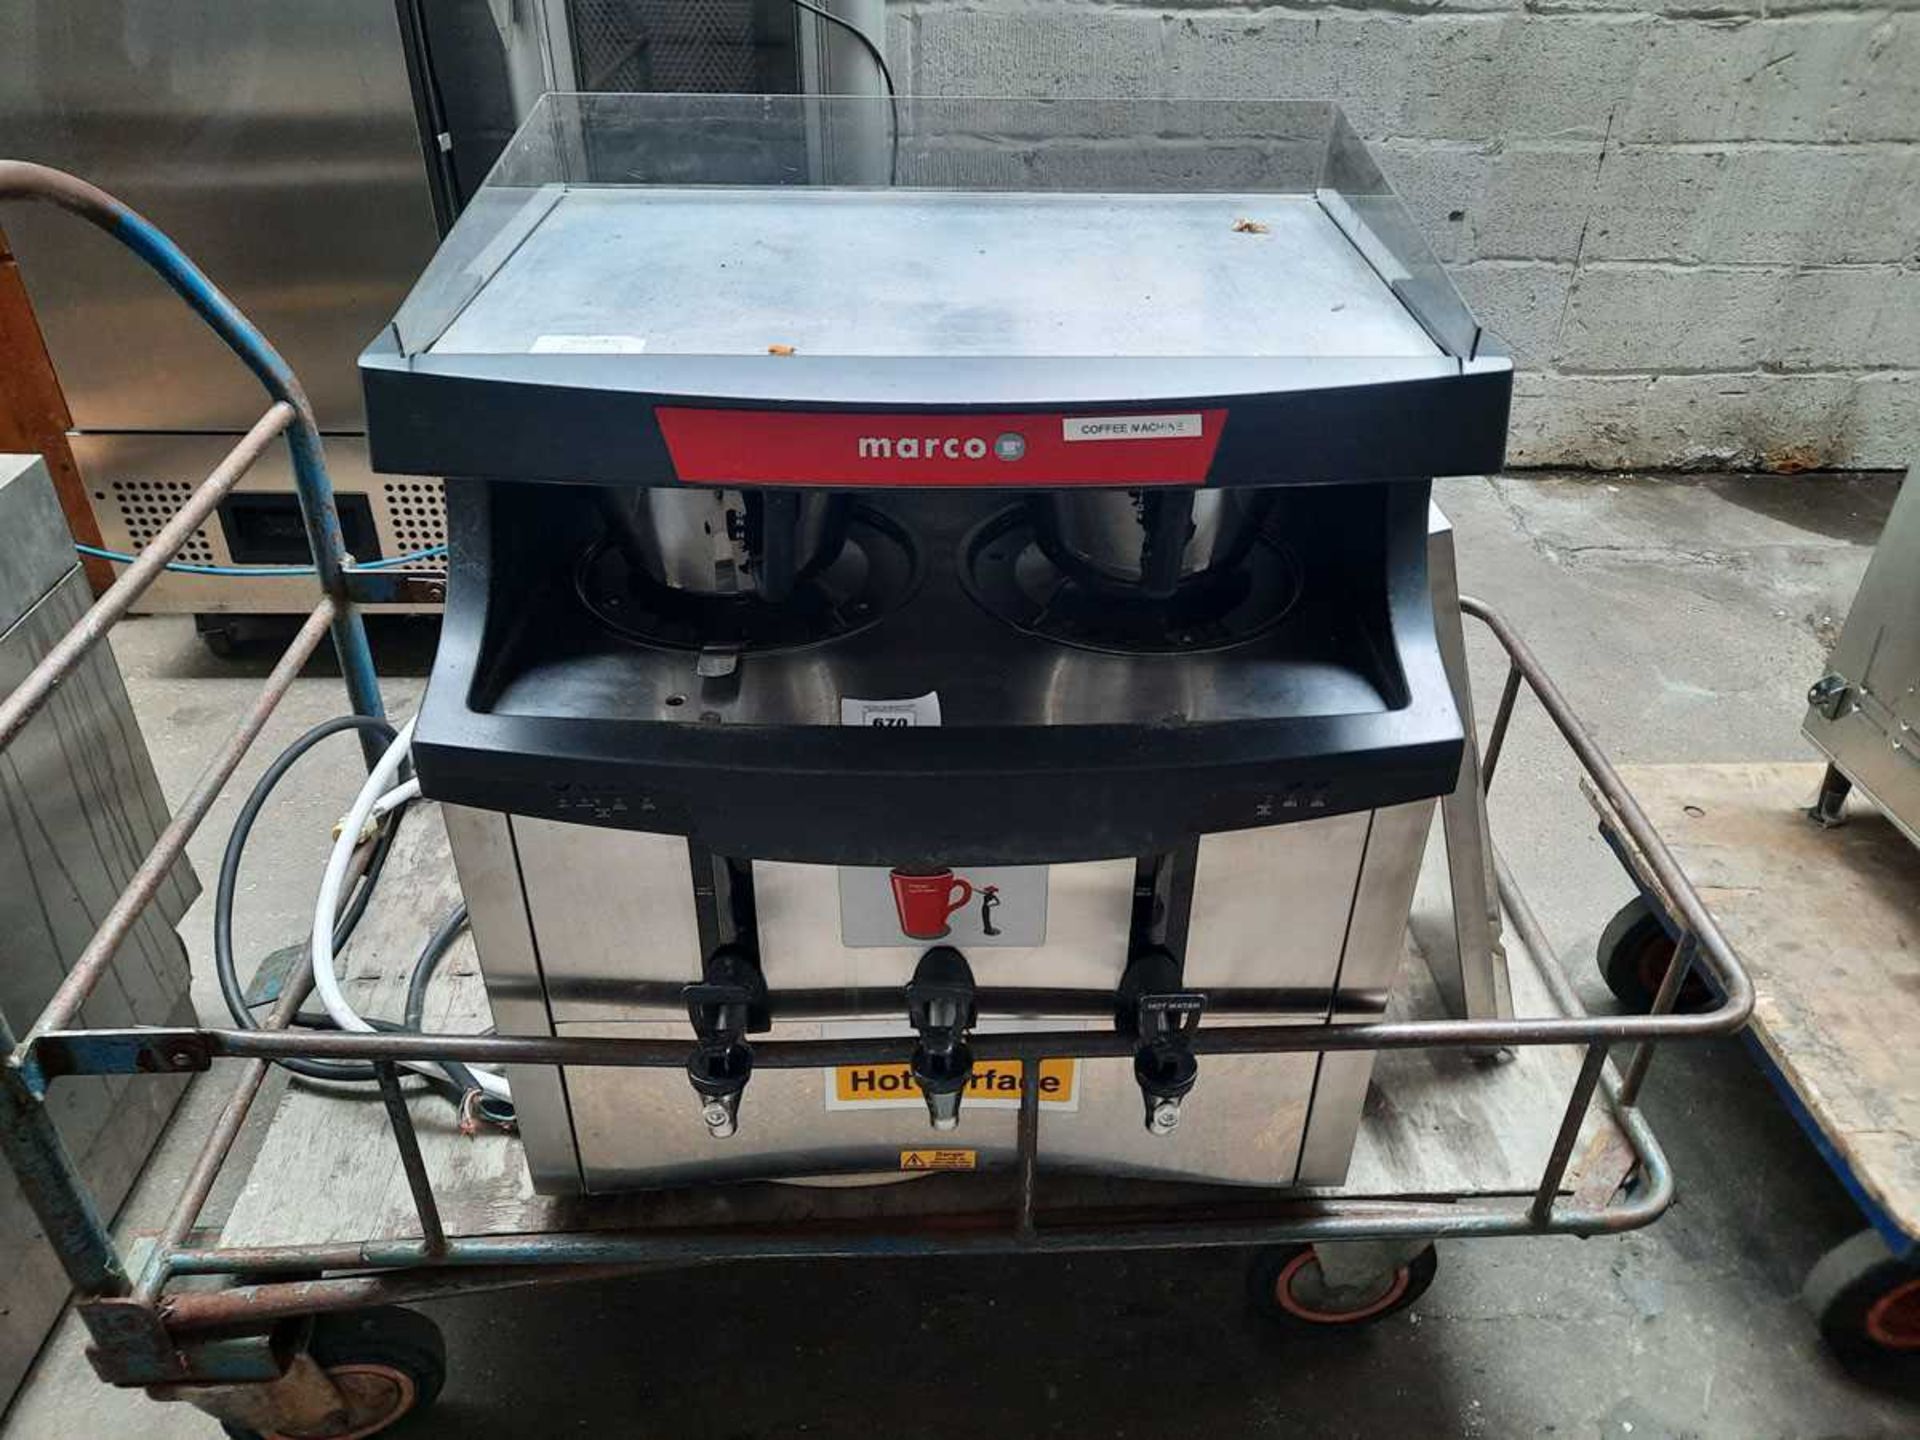 66cm Marco coffee brewer and hot water boiler